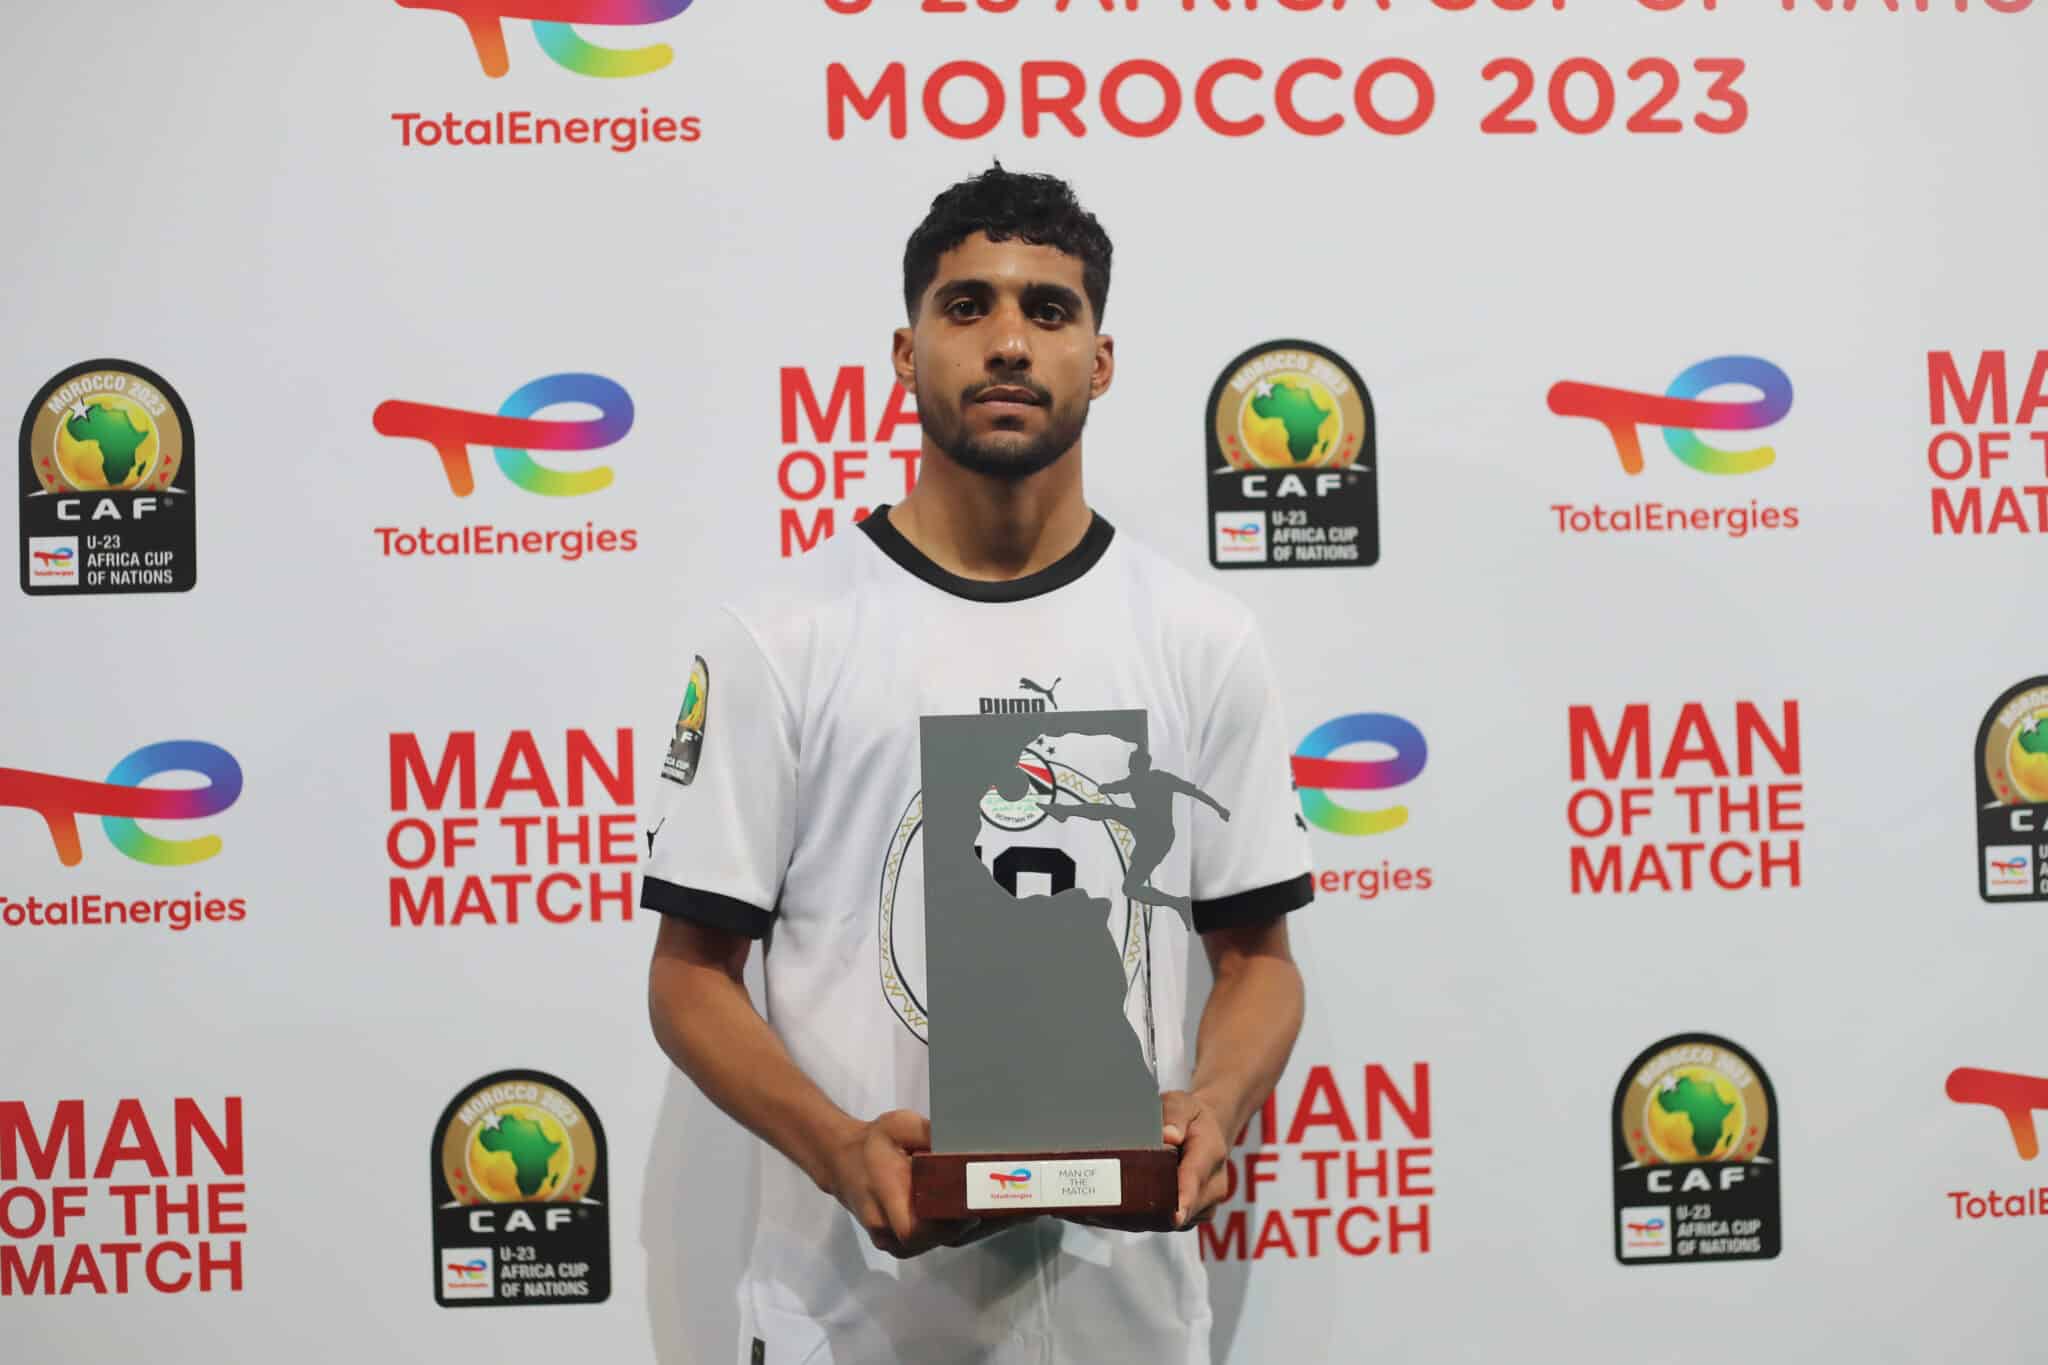 Ibrahim Aly Adel of Egypt awarded TotalEnergies Man of the Match during the 2023 U23 Africa Cup of Nations final match between Morocco v Egypt held at Prince Moulay Abdallah Stadium in Rabat, Morocco on 08 July 2023 Nour Akanja/Sports Inc - Photo by Icon sport